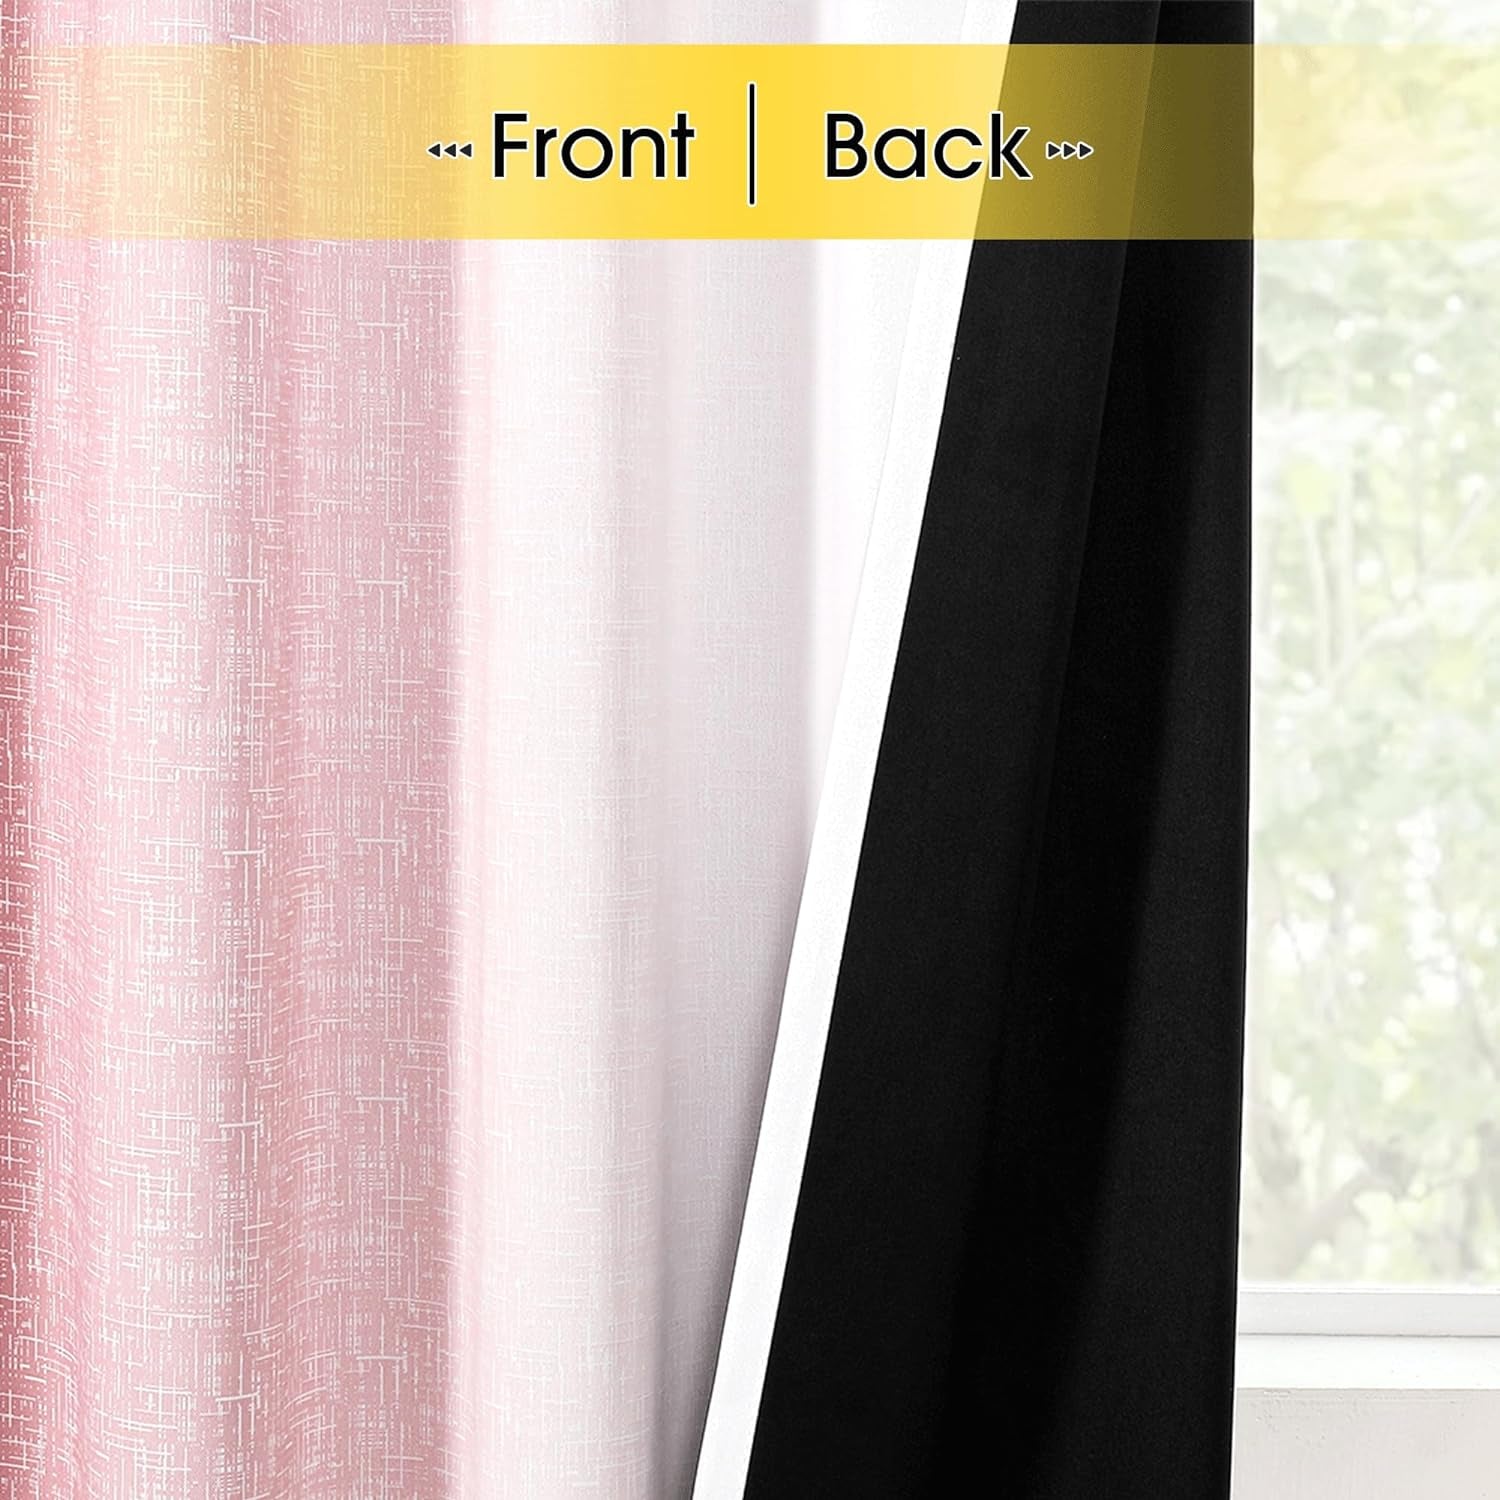 Geomoroccan Ombre 100% Blackout Curtains 84 Inches Long, Pink and White 2 Tone Reversible Window Treatments for Bedroom Living Room, Linen Gradient Print Rod Pocket Drapes 52" W 2 Panel Sets  Geomoroccan   